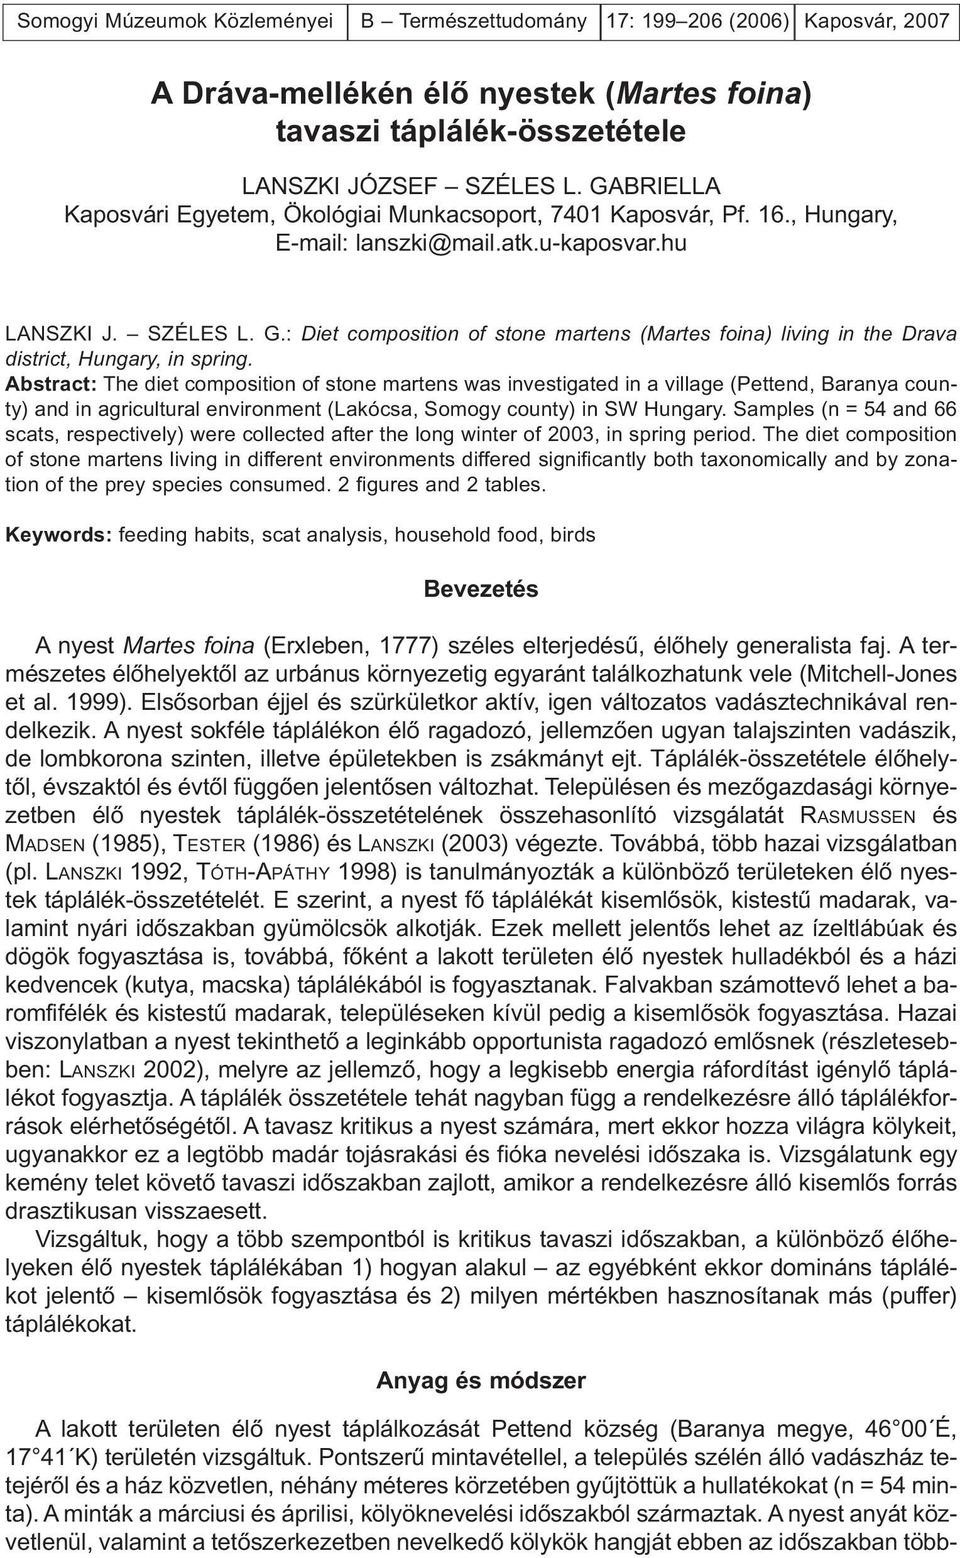 Abstract: The diet composition of stone martens was investigated in a village (Pettend, Baranya county) and in agricultural environment (Lakócsa, Somogy county) in SW Hungary.